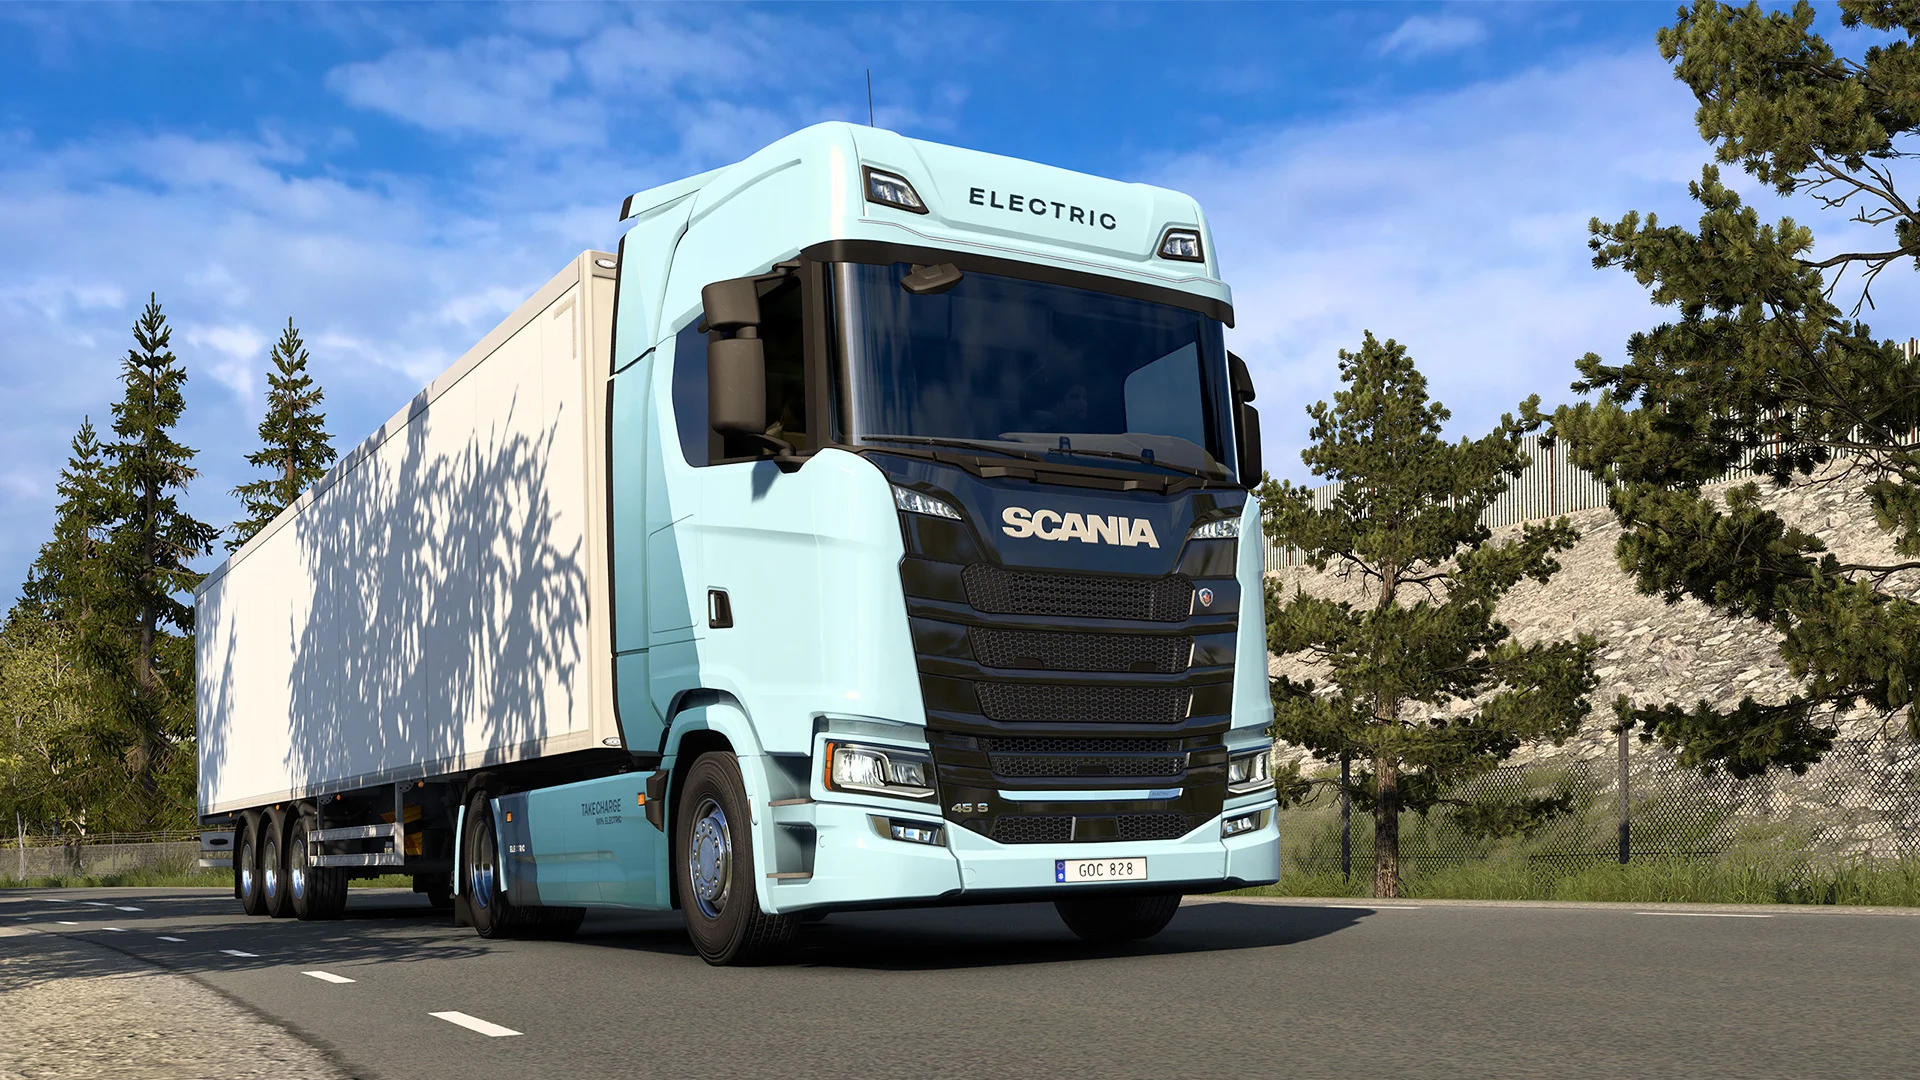 Electric Scania trucks are now available in Euro Truck Simulator 2. But there is a nuance